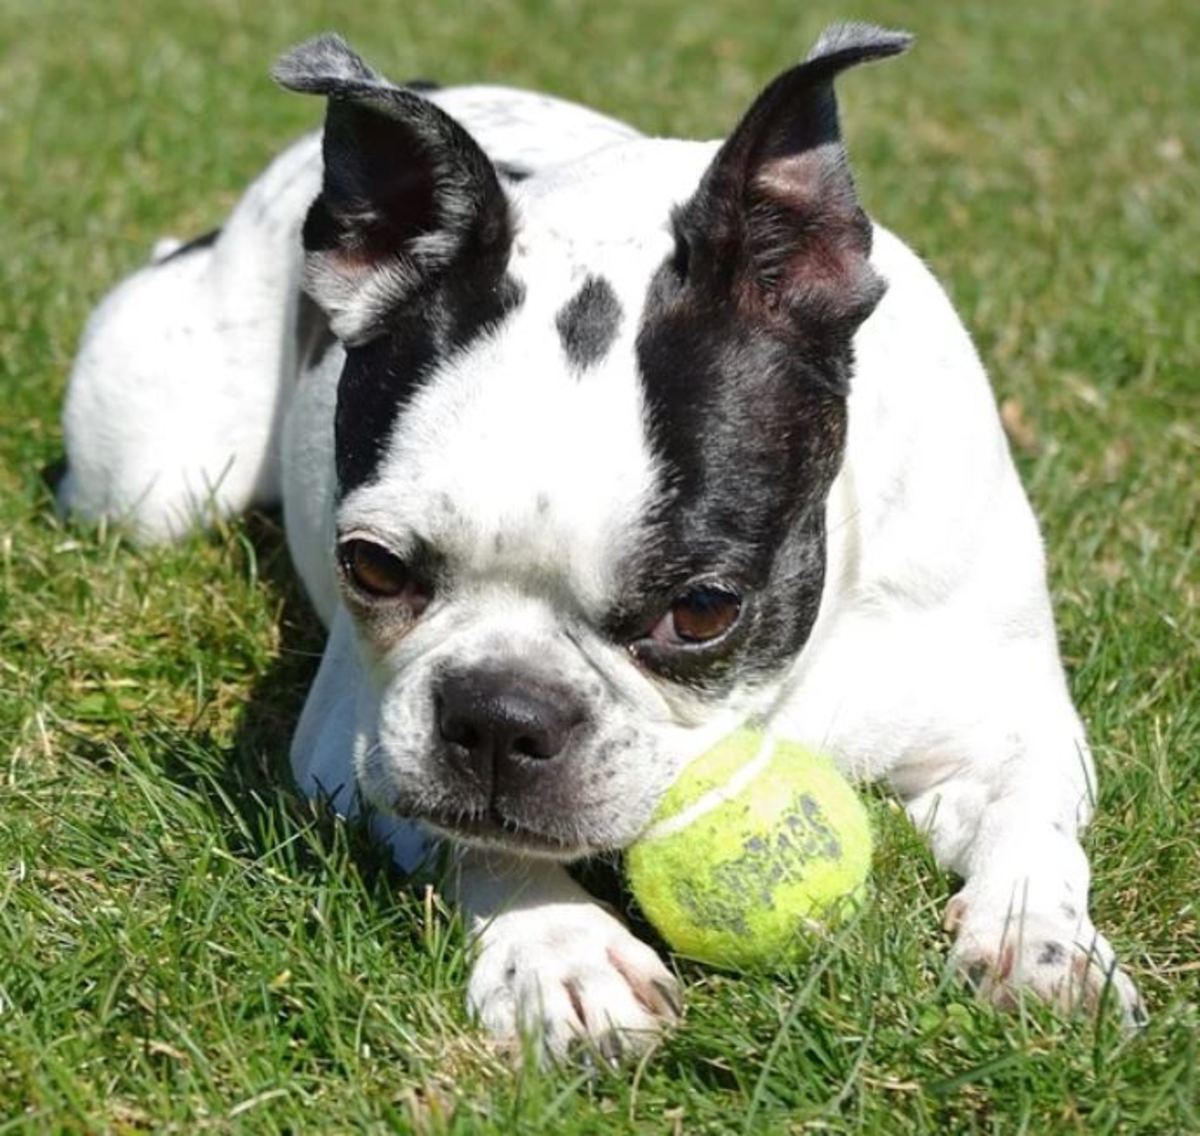 Picture of a Boston terrier with the Haggerty dot. Although the Haggerty spot is not specifically mentioned in the breed standard, it is considered a characteristic.